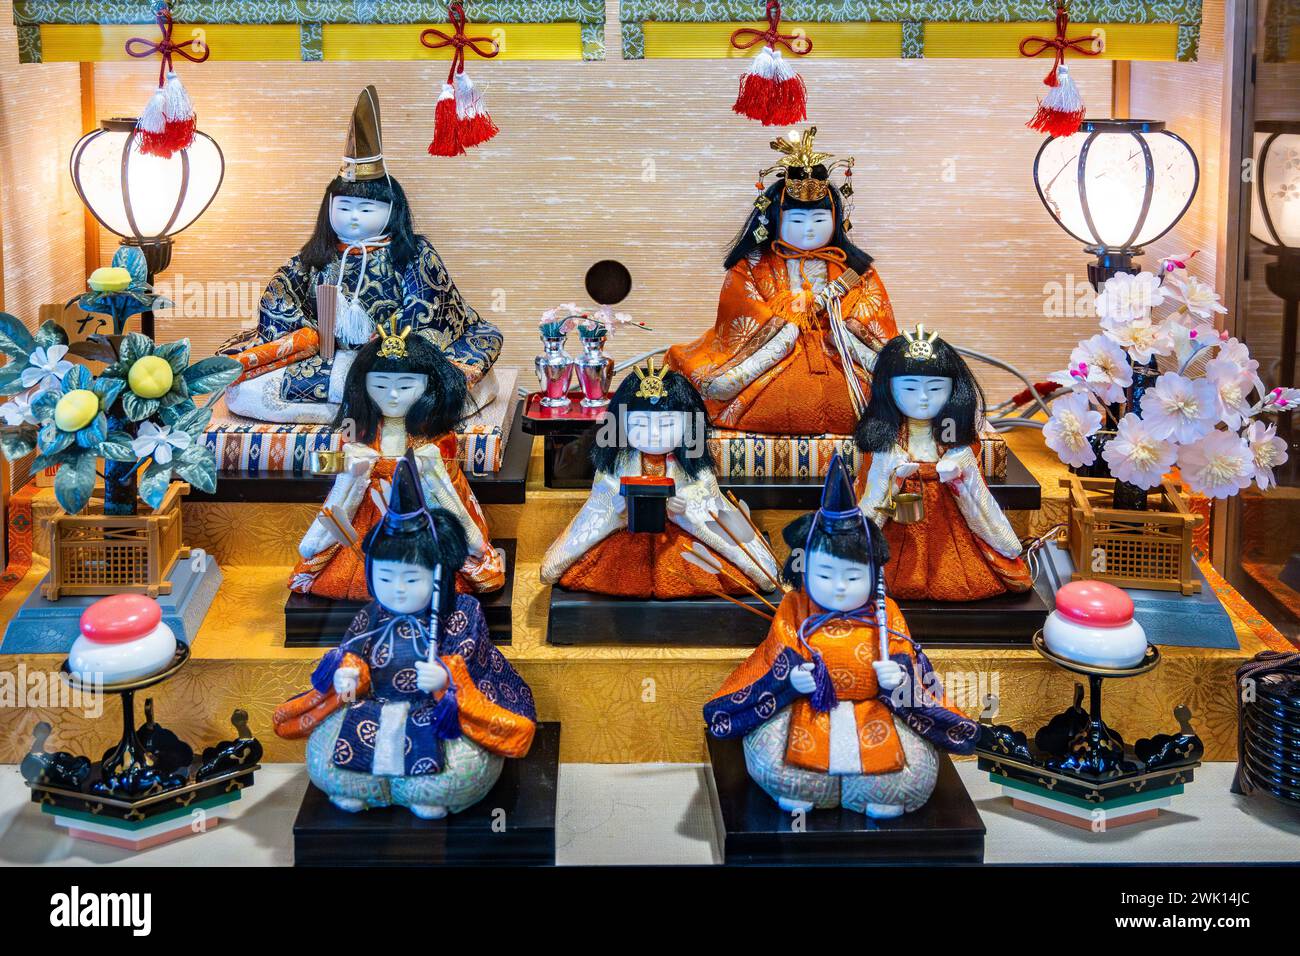 Colorful traditional dolls are in display to celebrate Hina Matsuri (Doll Festival or Girls' Festival) on March 3rd every year. Hokkaido, Japan. Stock Photo